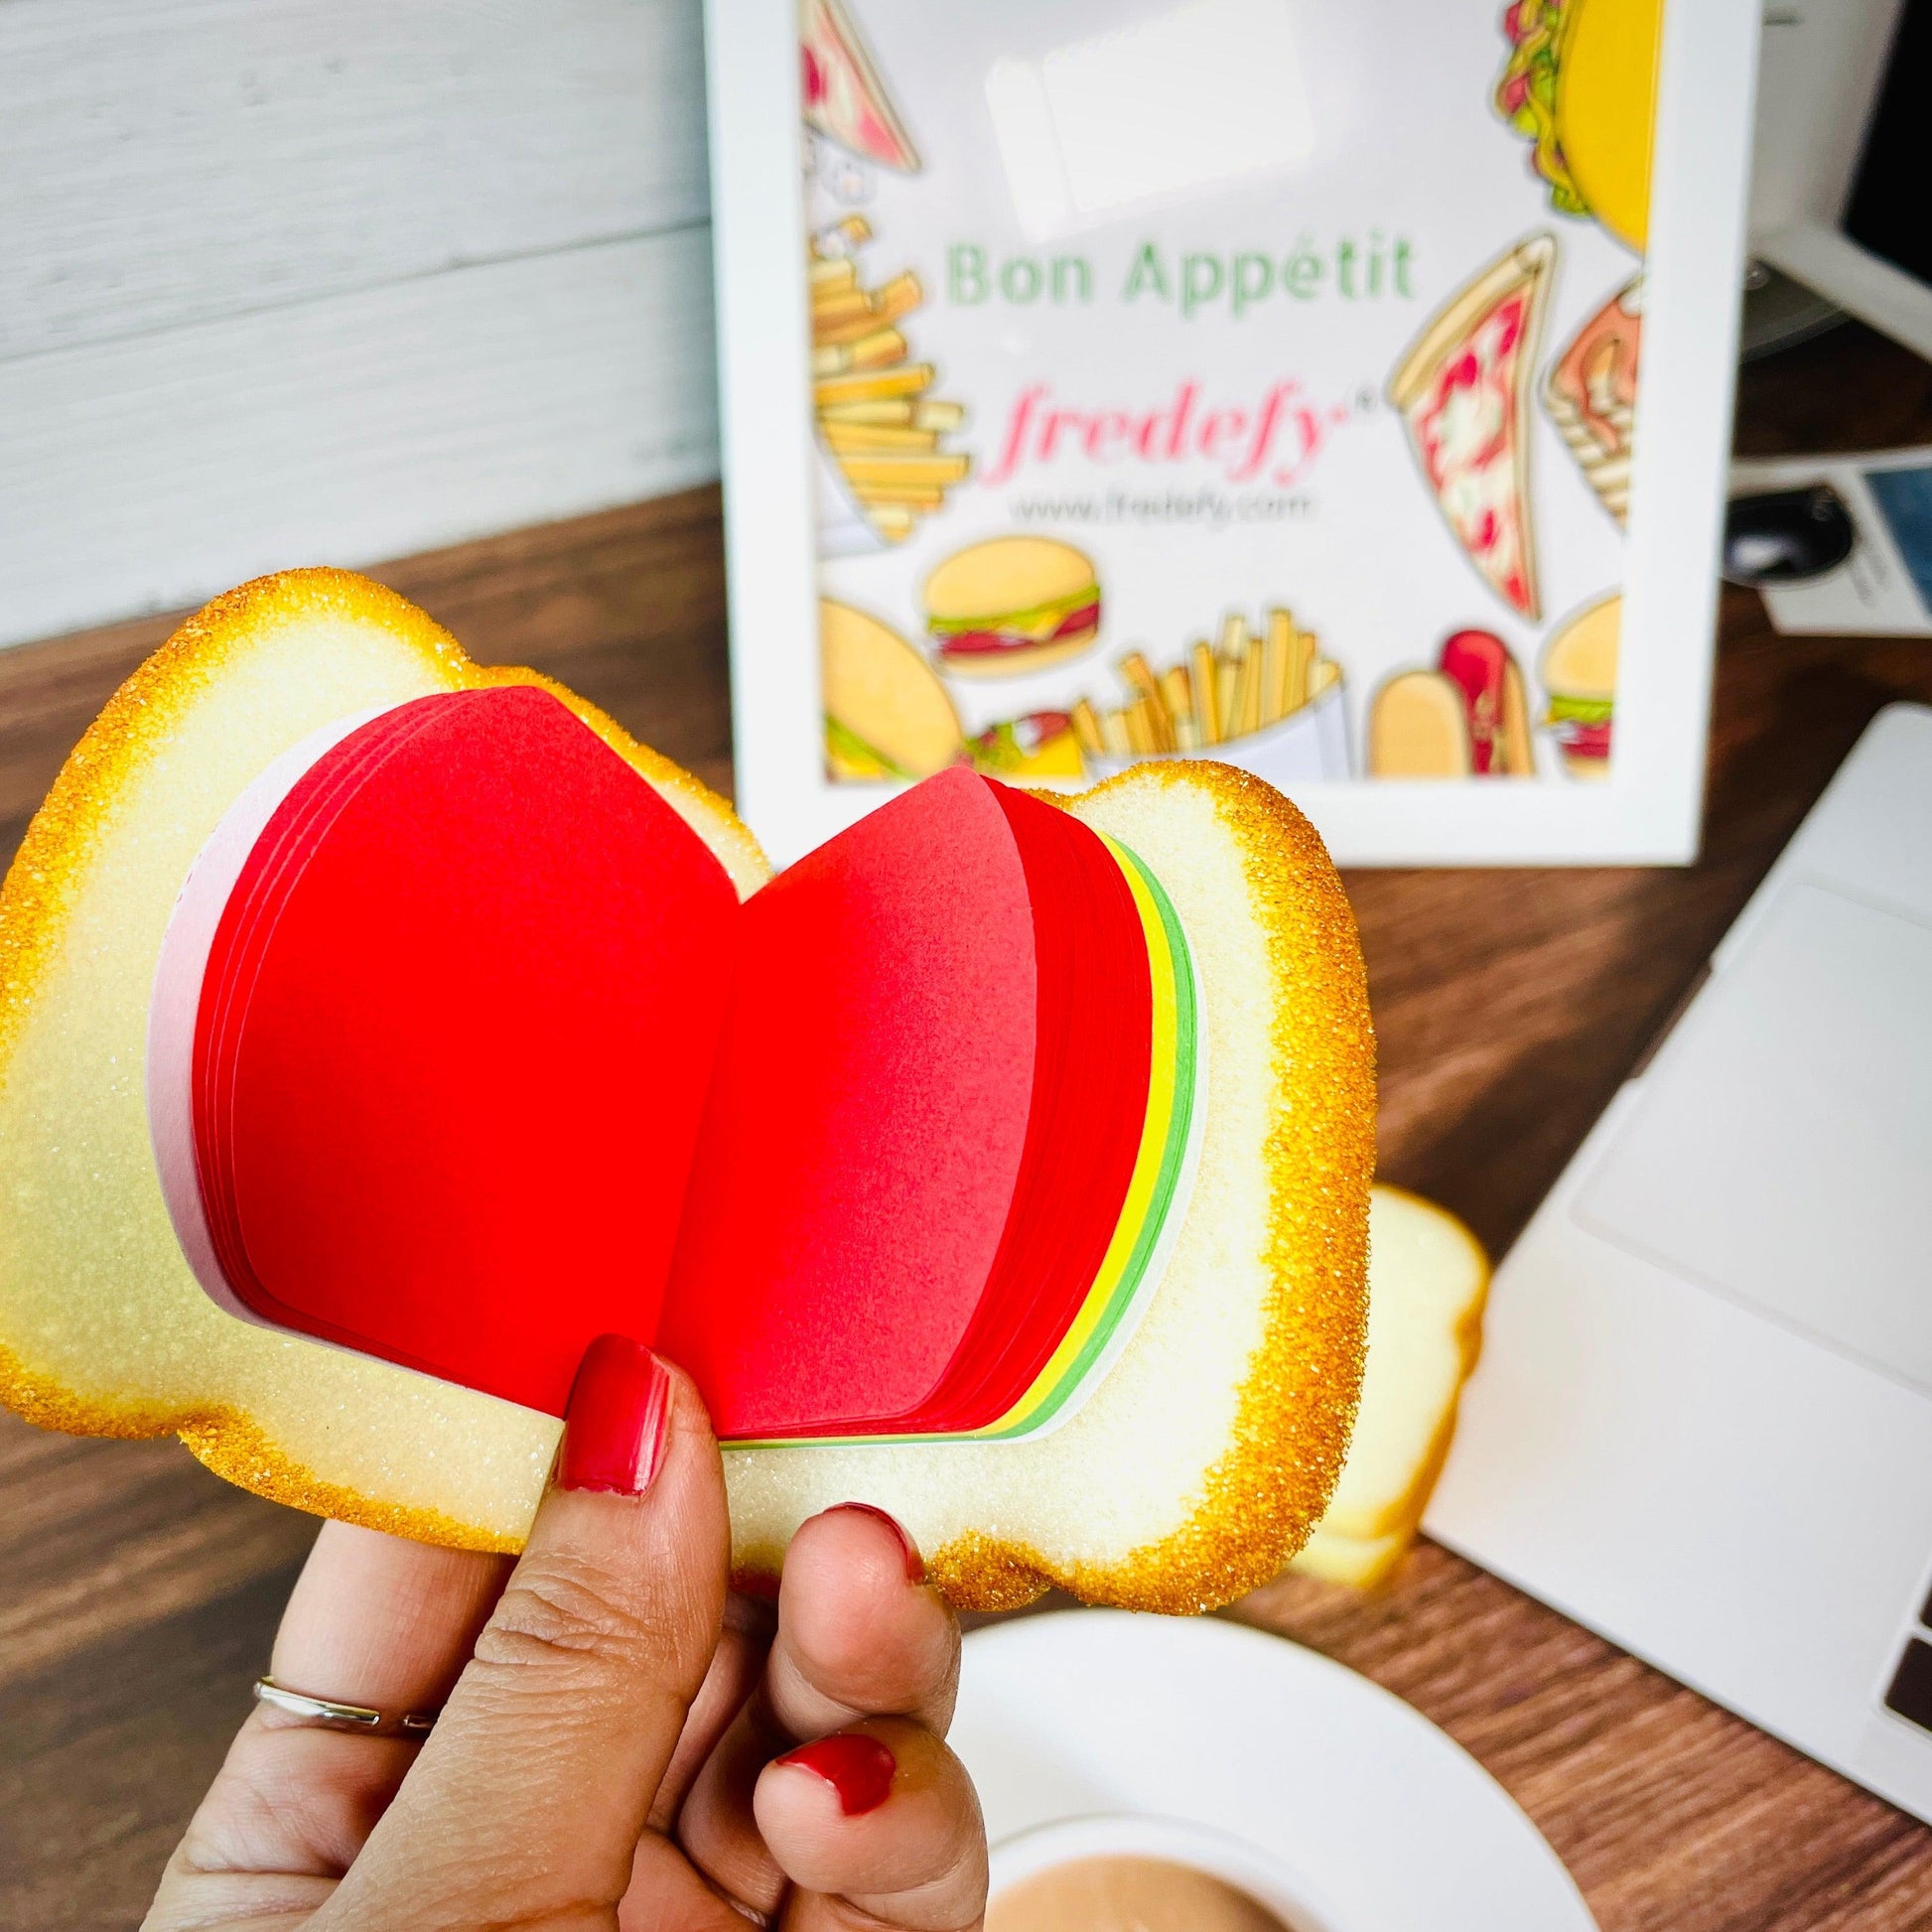 Sandwich Diary With Colourful Pages-Fredefy